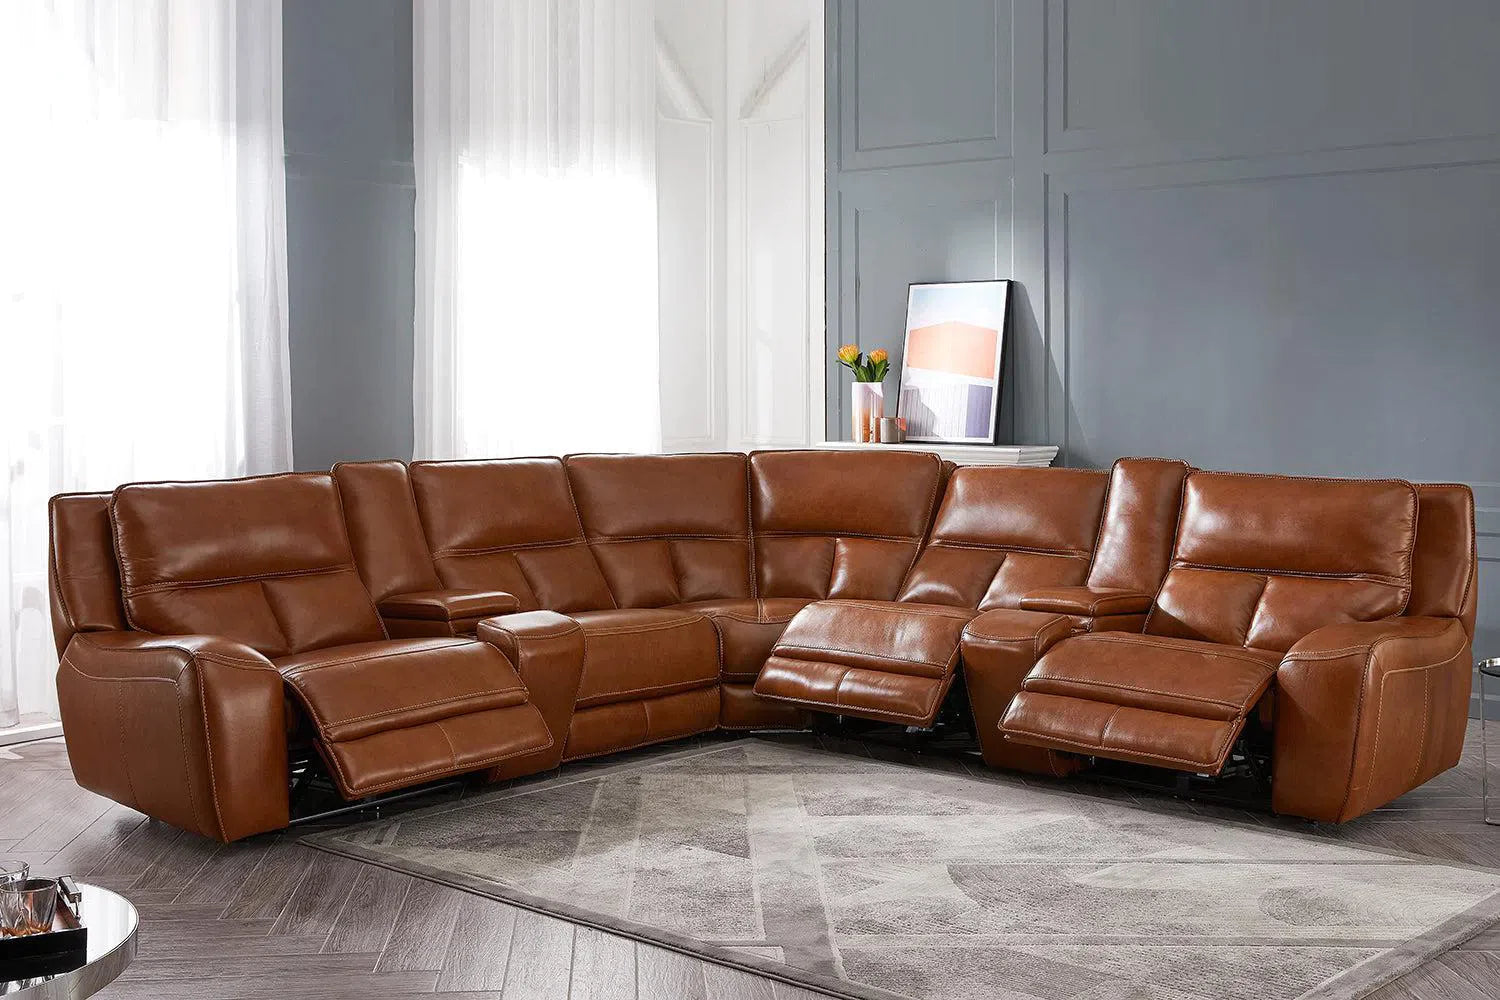 Leather lounges & sofas in Perth and Melbourne